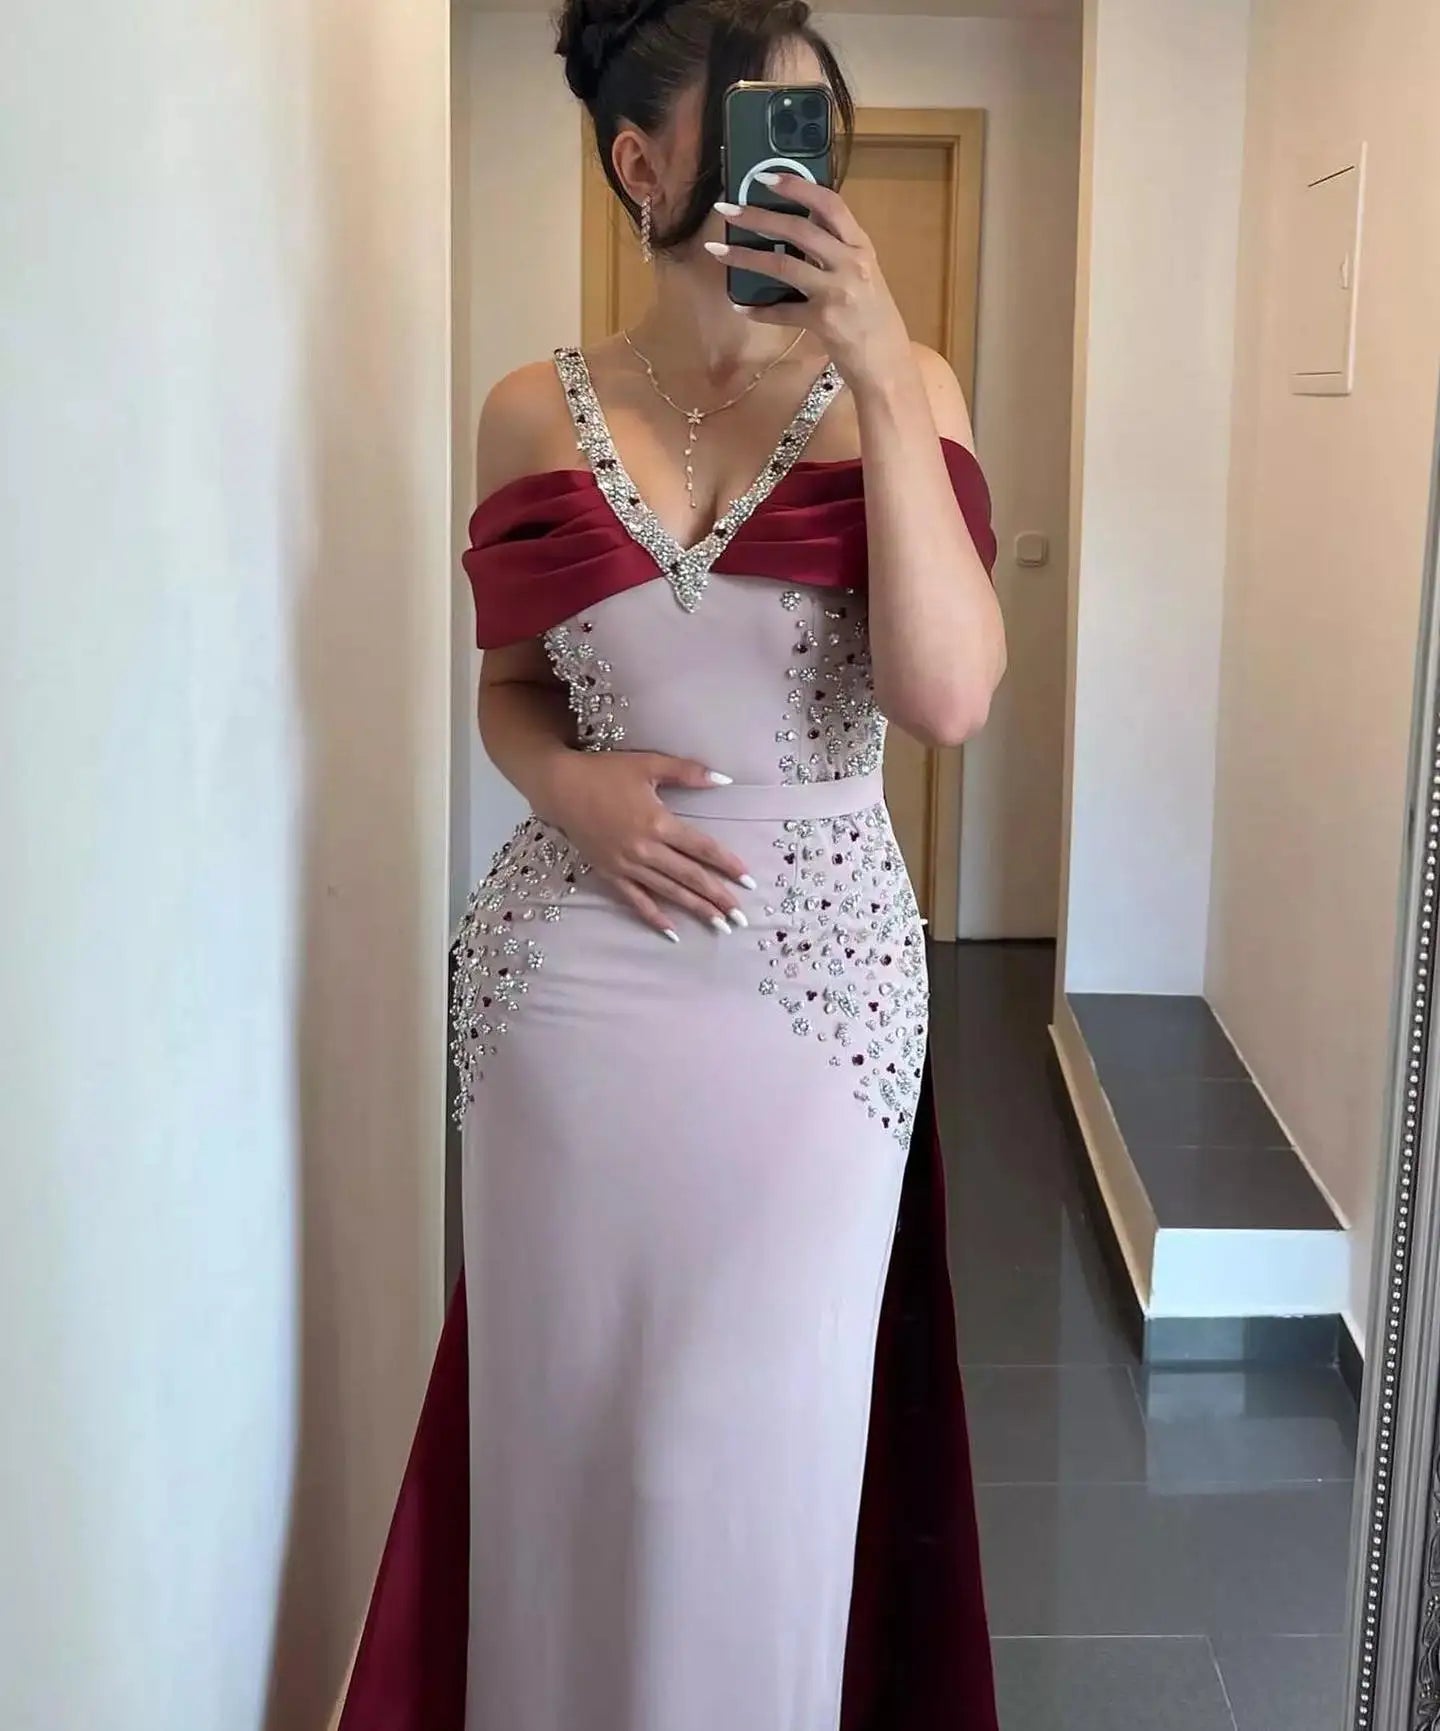 Luxury Embellished Floor-Length Dress with Cape